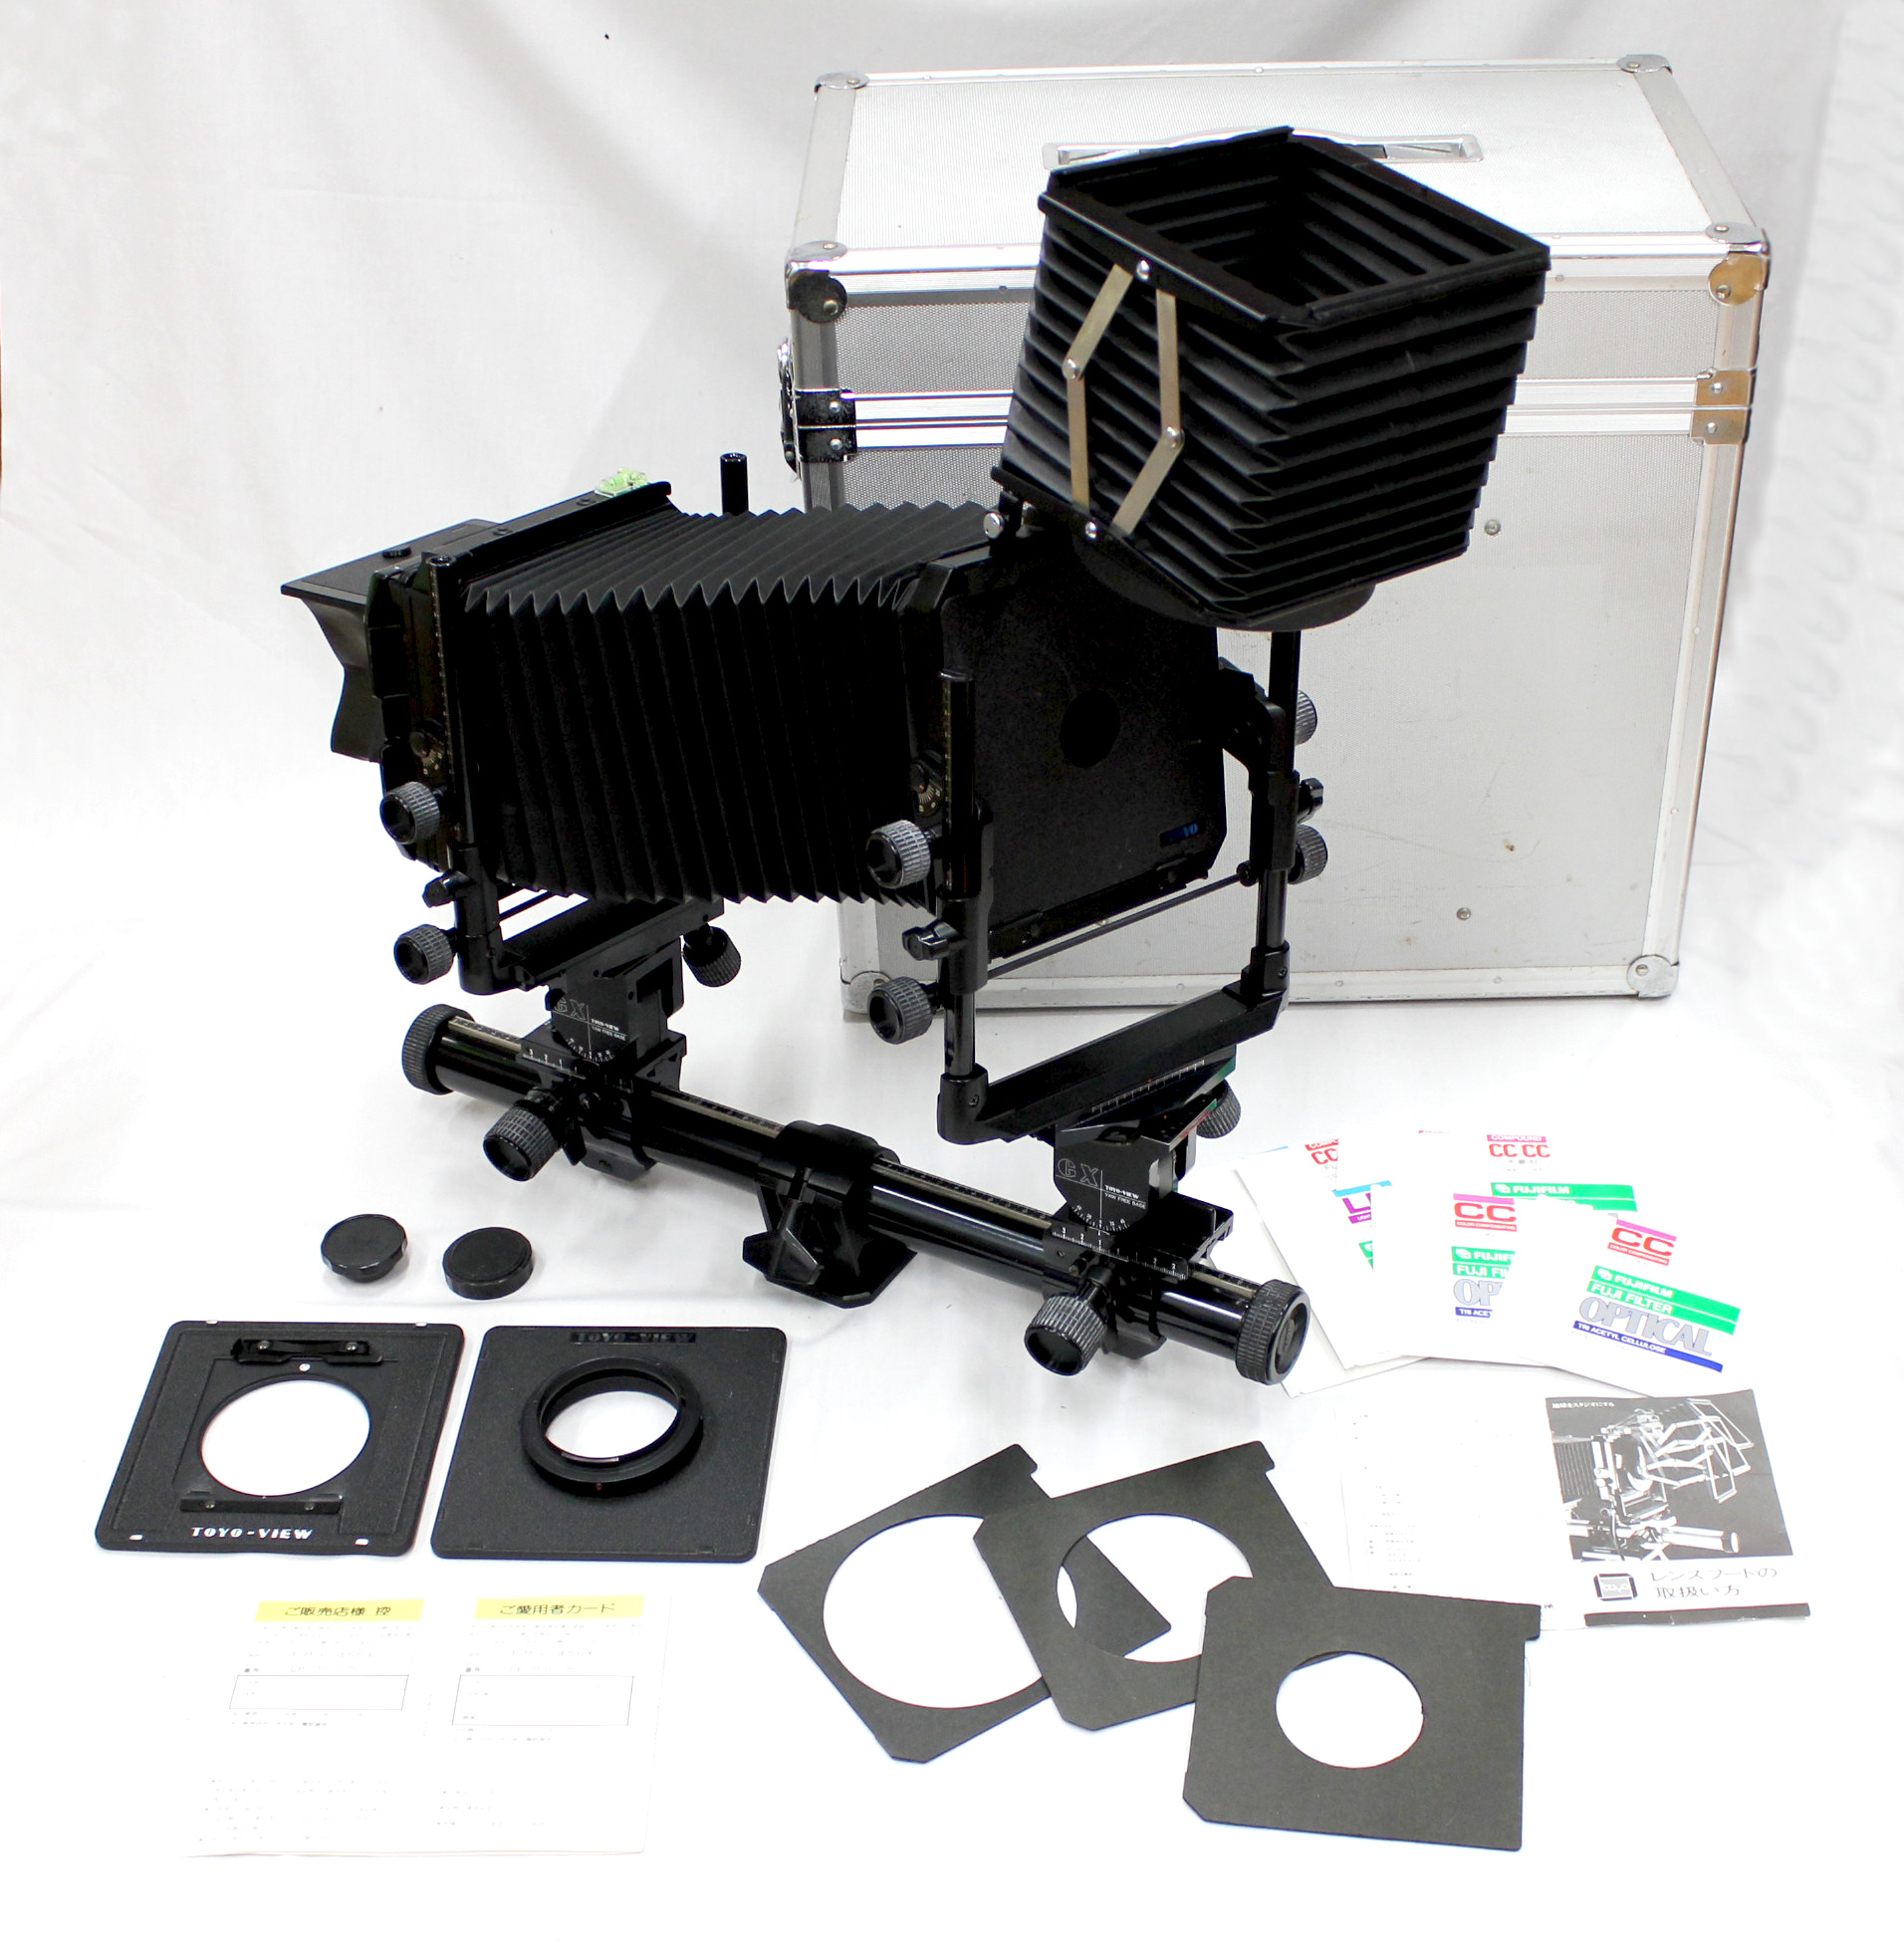 Japan Used Camera Shop | Toyo-View 45GX Yaw Free 4x5 Large Format Monorail Camera Body with Lens Hood, Linhof Adapter etc. from Japan